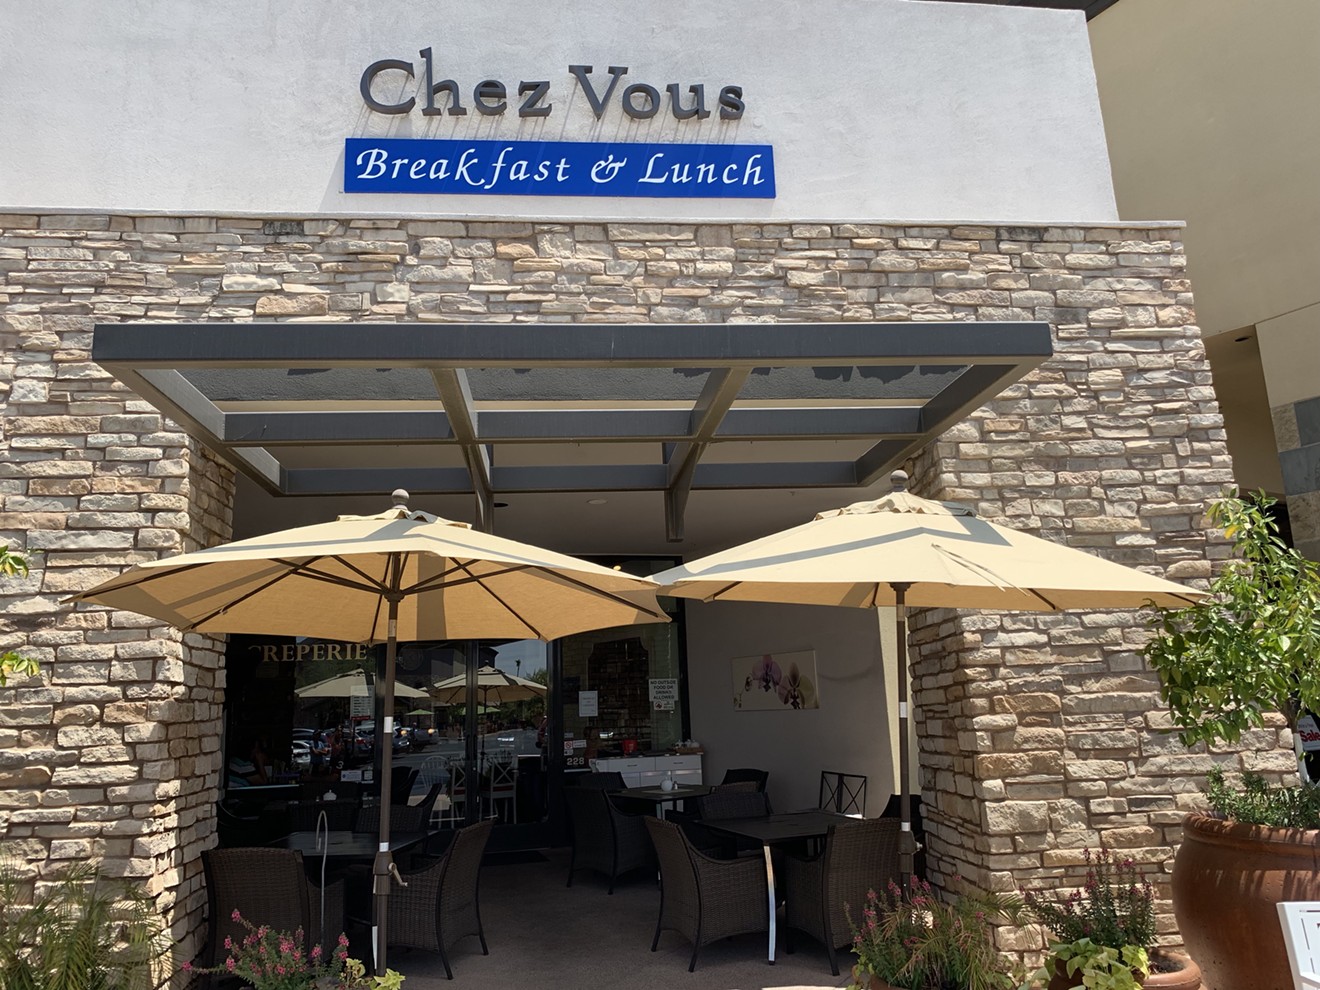 Chez Vous offers French ambiance without the overseas flight at Gainey Village.